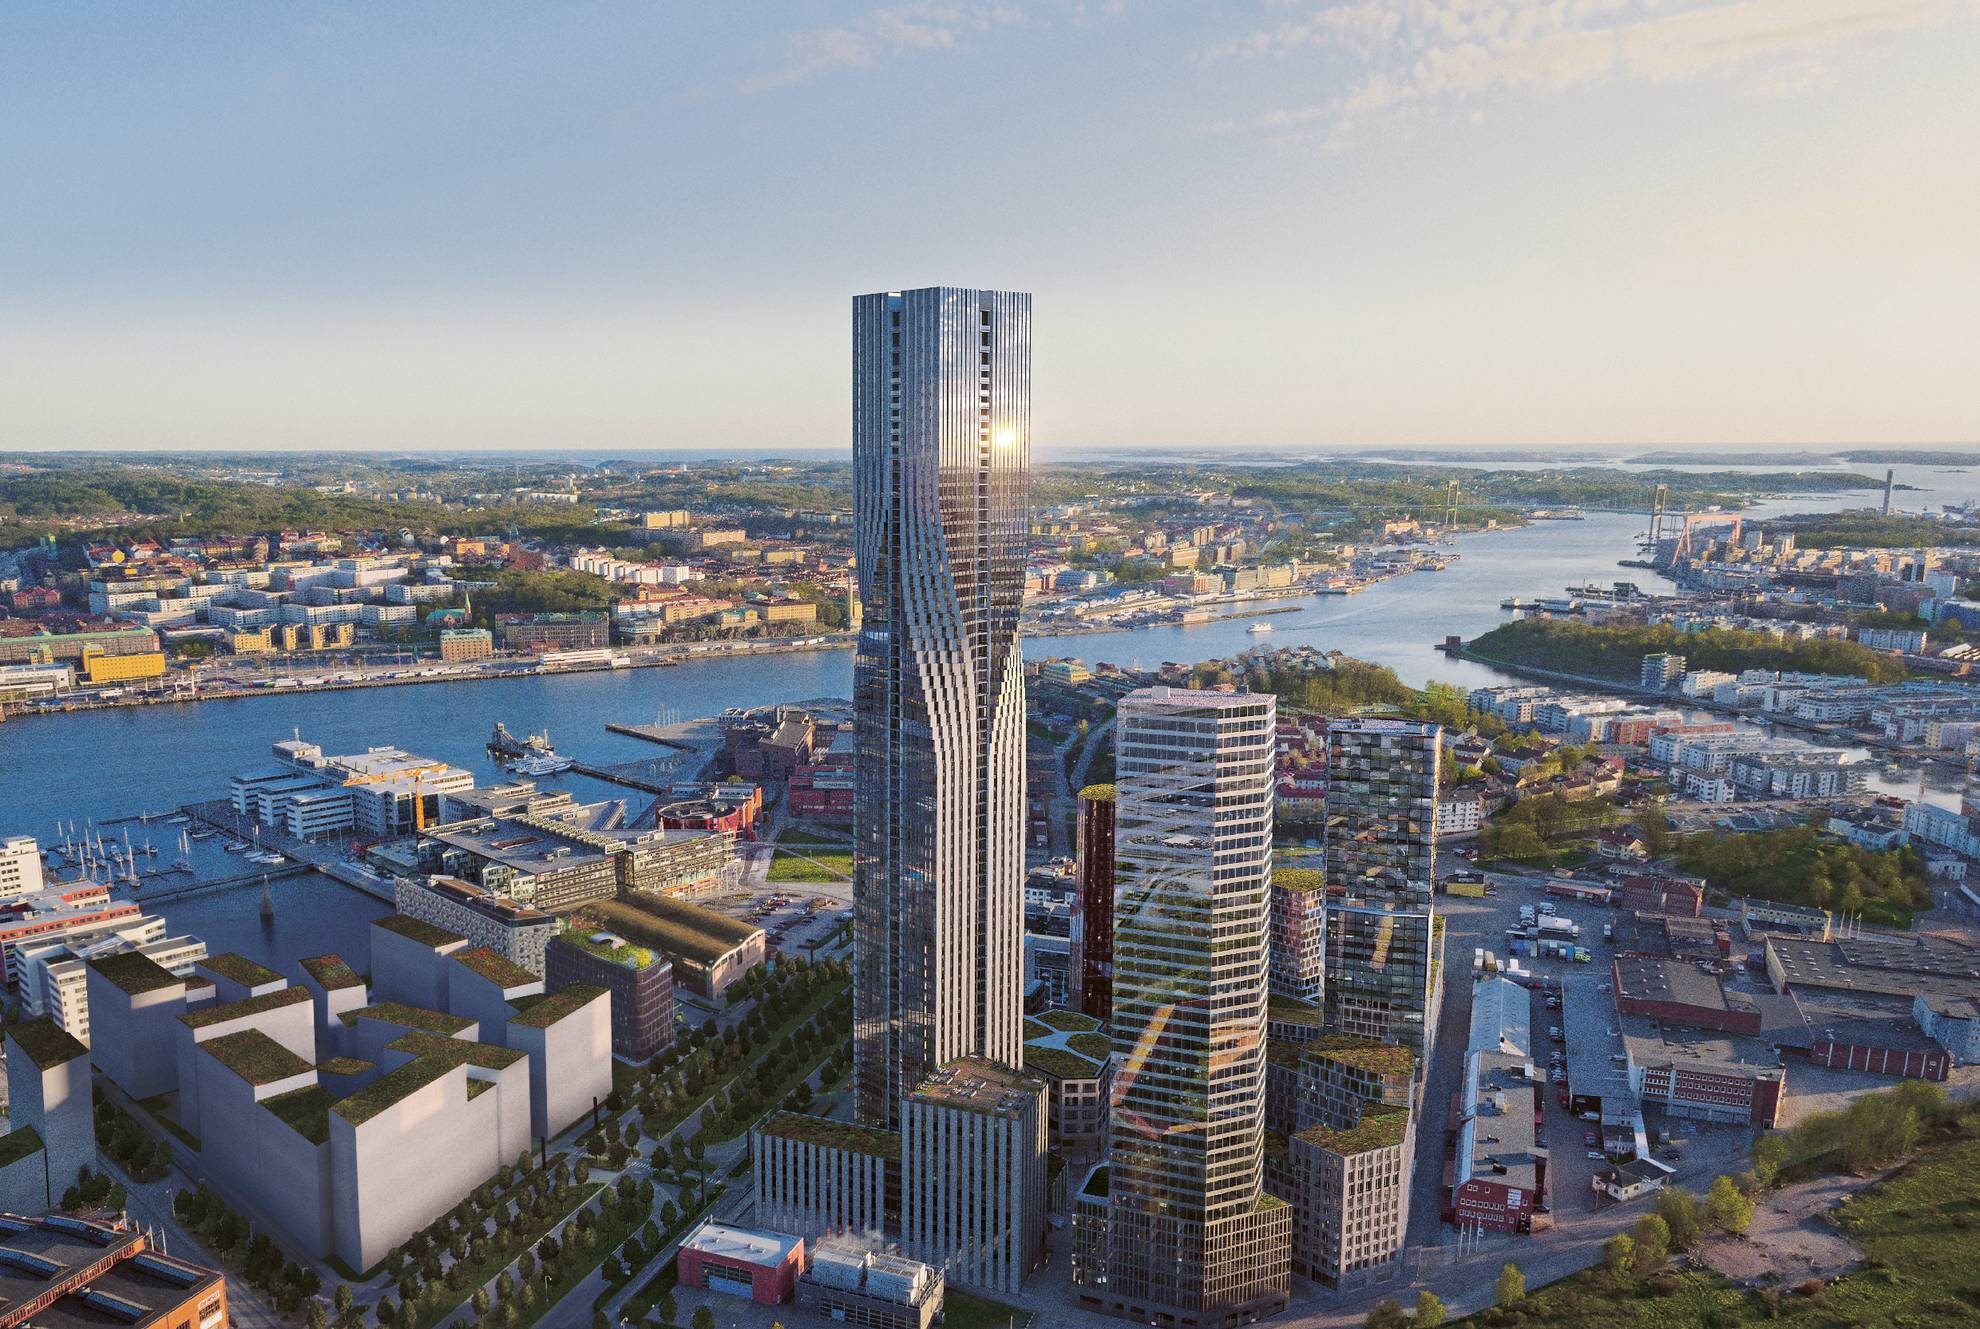 A rendered image of the Clarion Hotel Karlatornet tall building in Gothenburg.